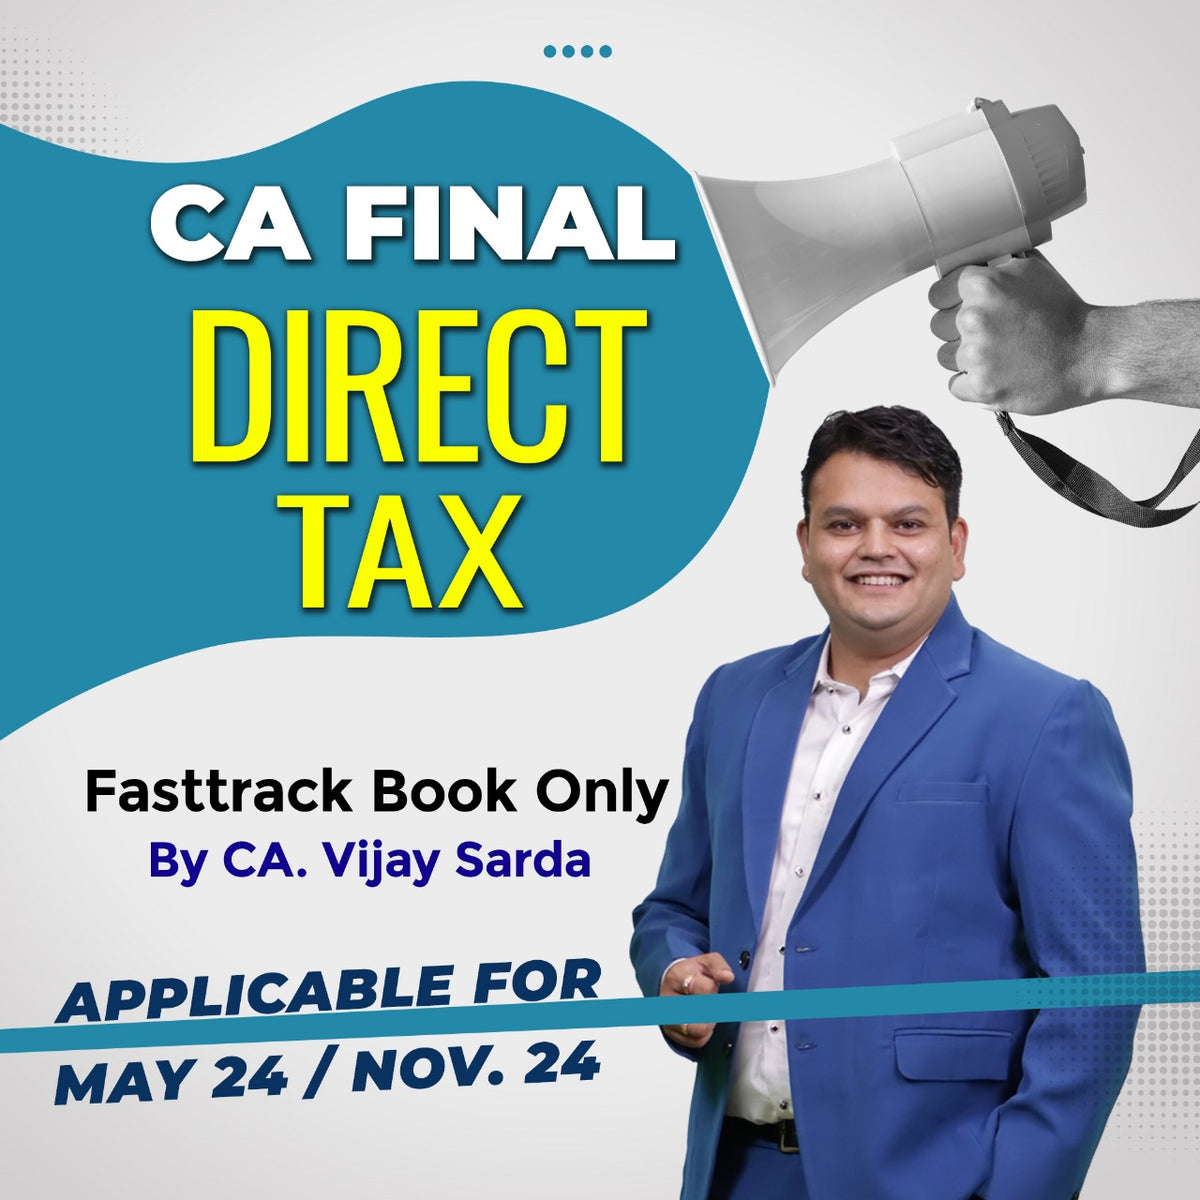 CA FINAL DT FASTRACK BOOK ONLY BY CA VIJAY SARDA